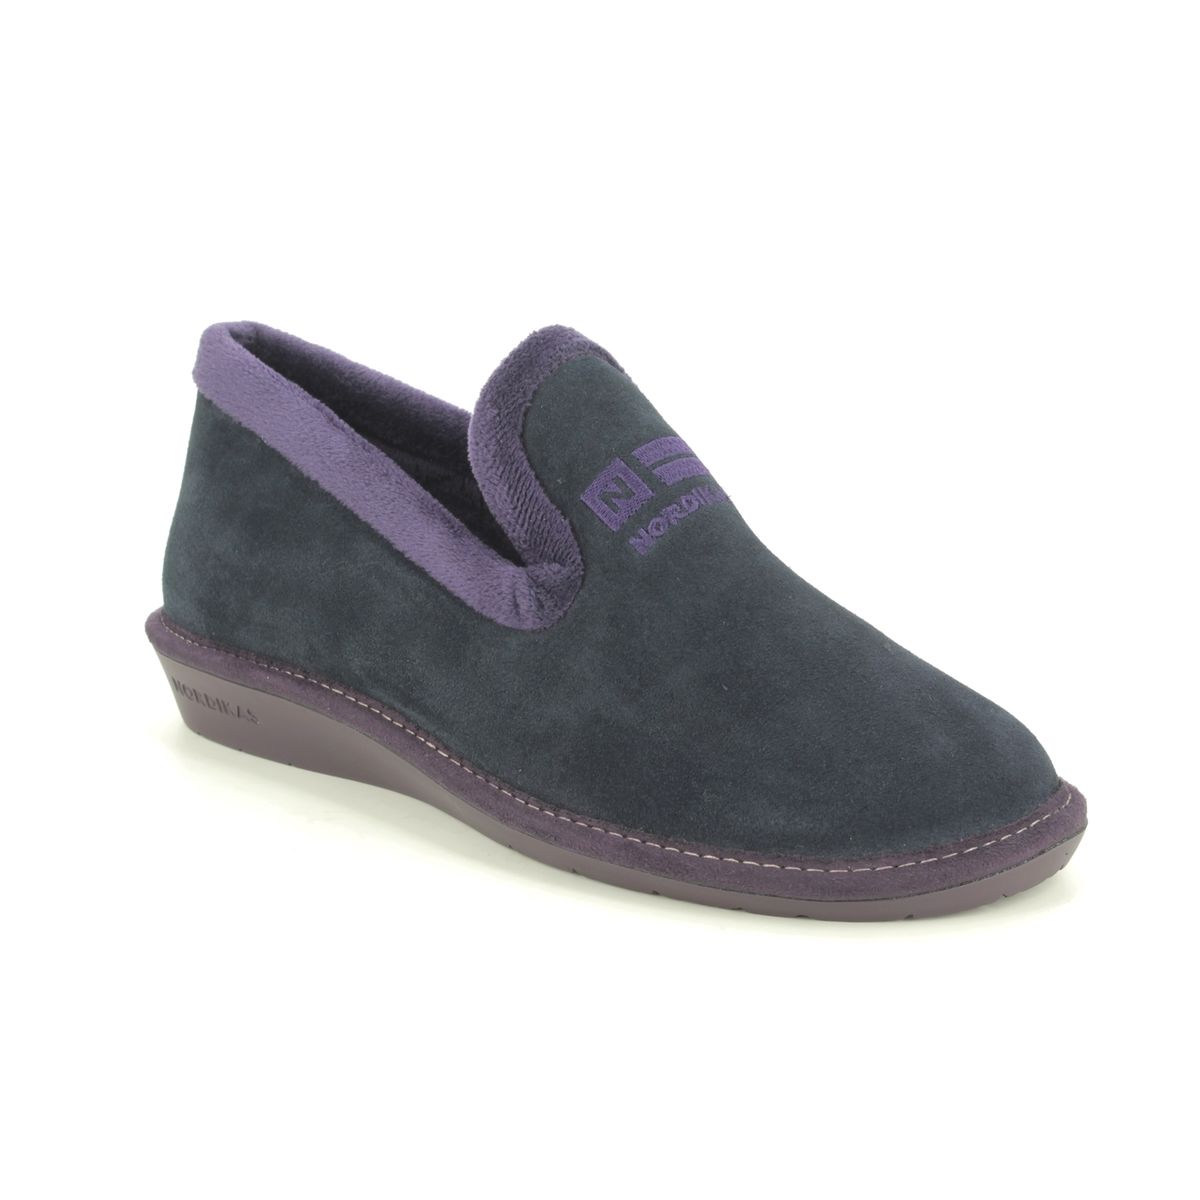 Nordikas Tabackin Navy Suede Womens Slippers 305-4   Nicola 3 In Size 39 In Plain Navy Suede